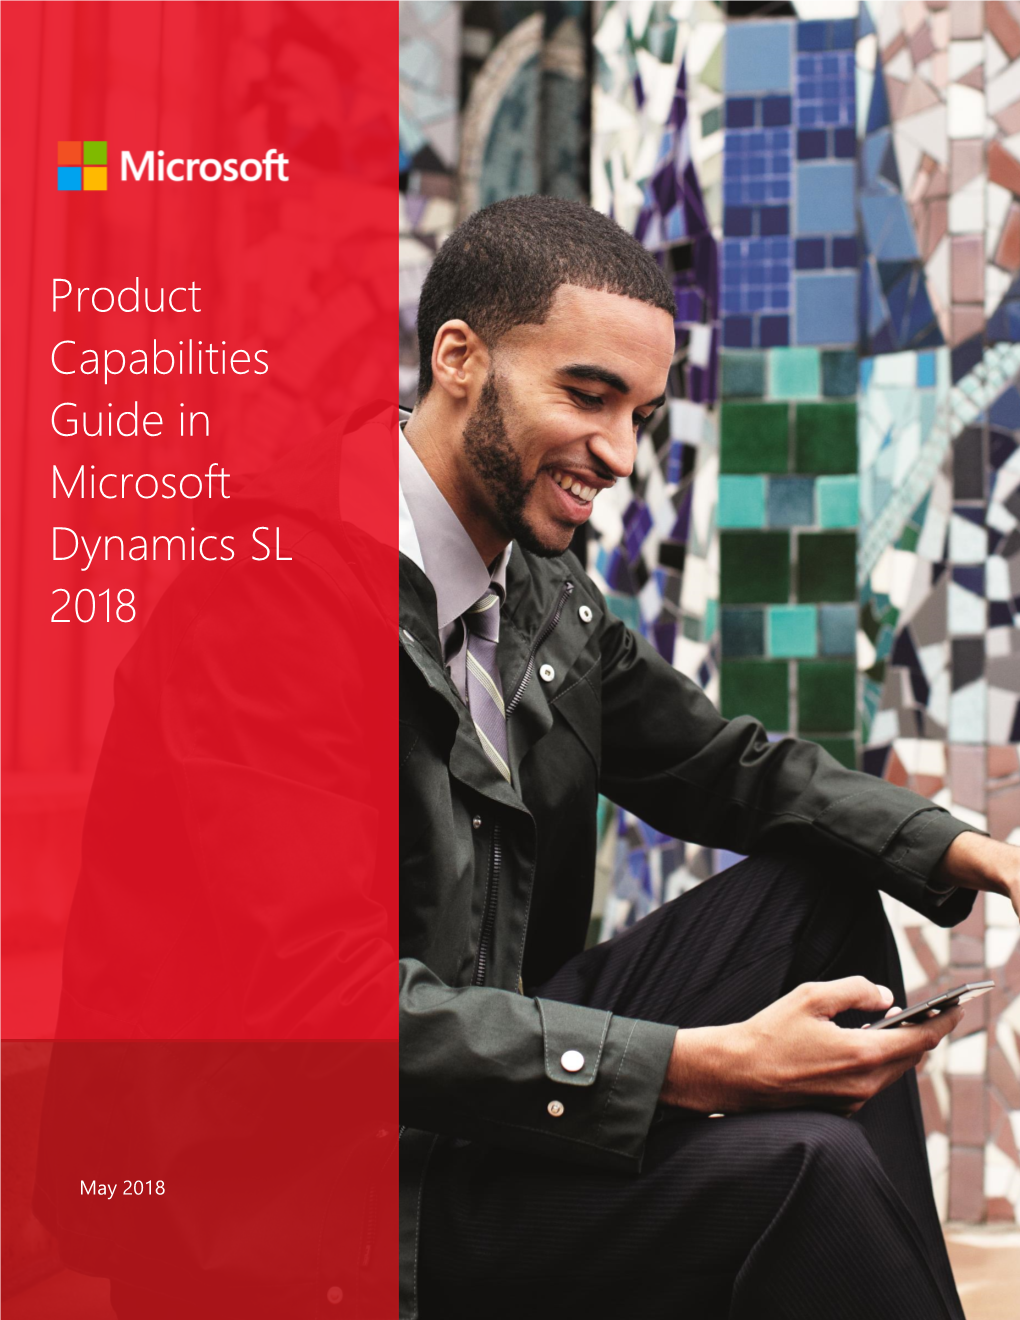 Product Capabilities Guide in Microsoft Dynamics SL 2018